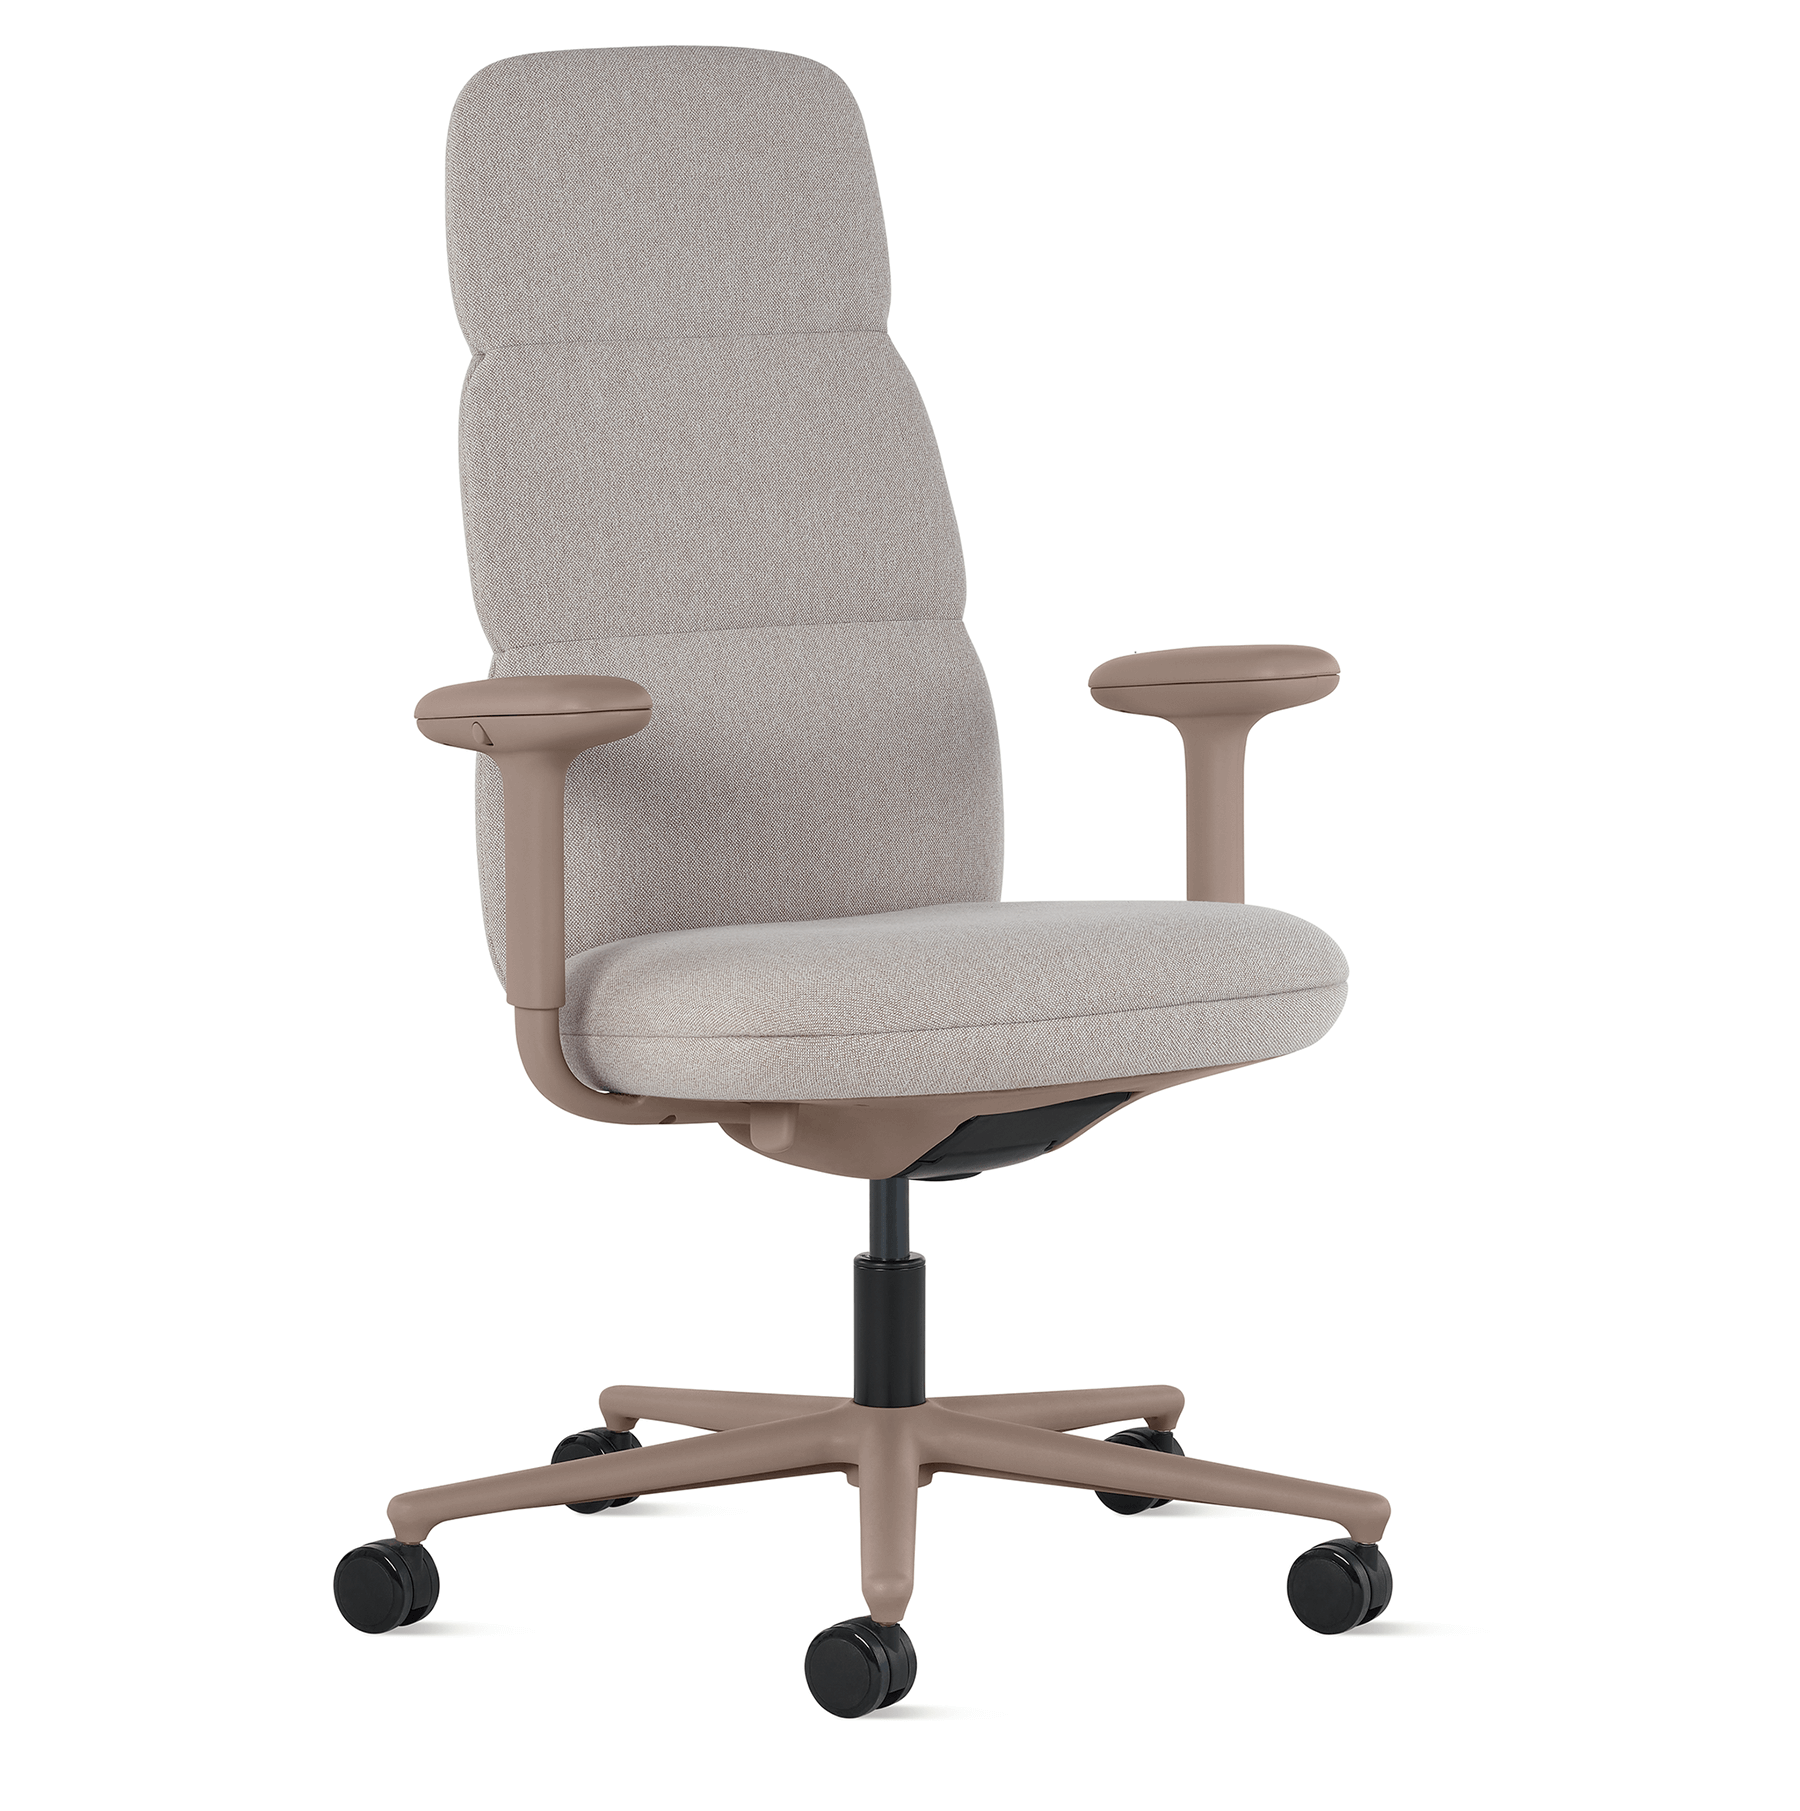 asari desk chair with adjustable arms